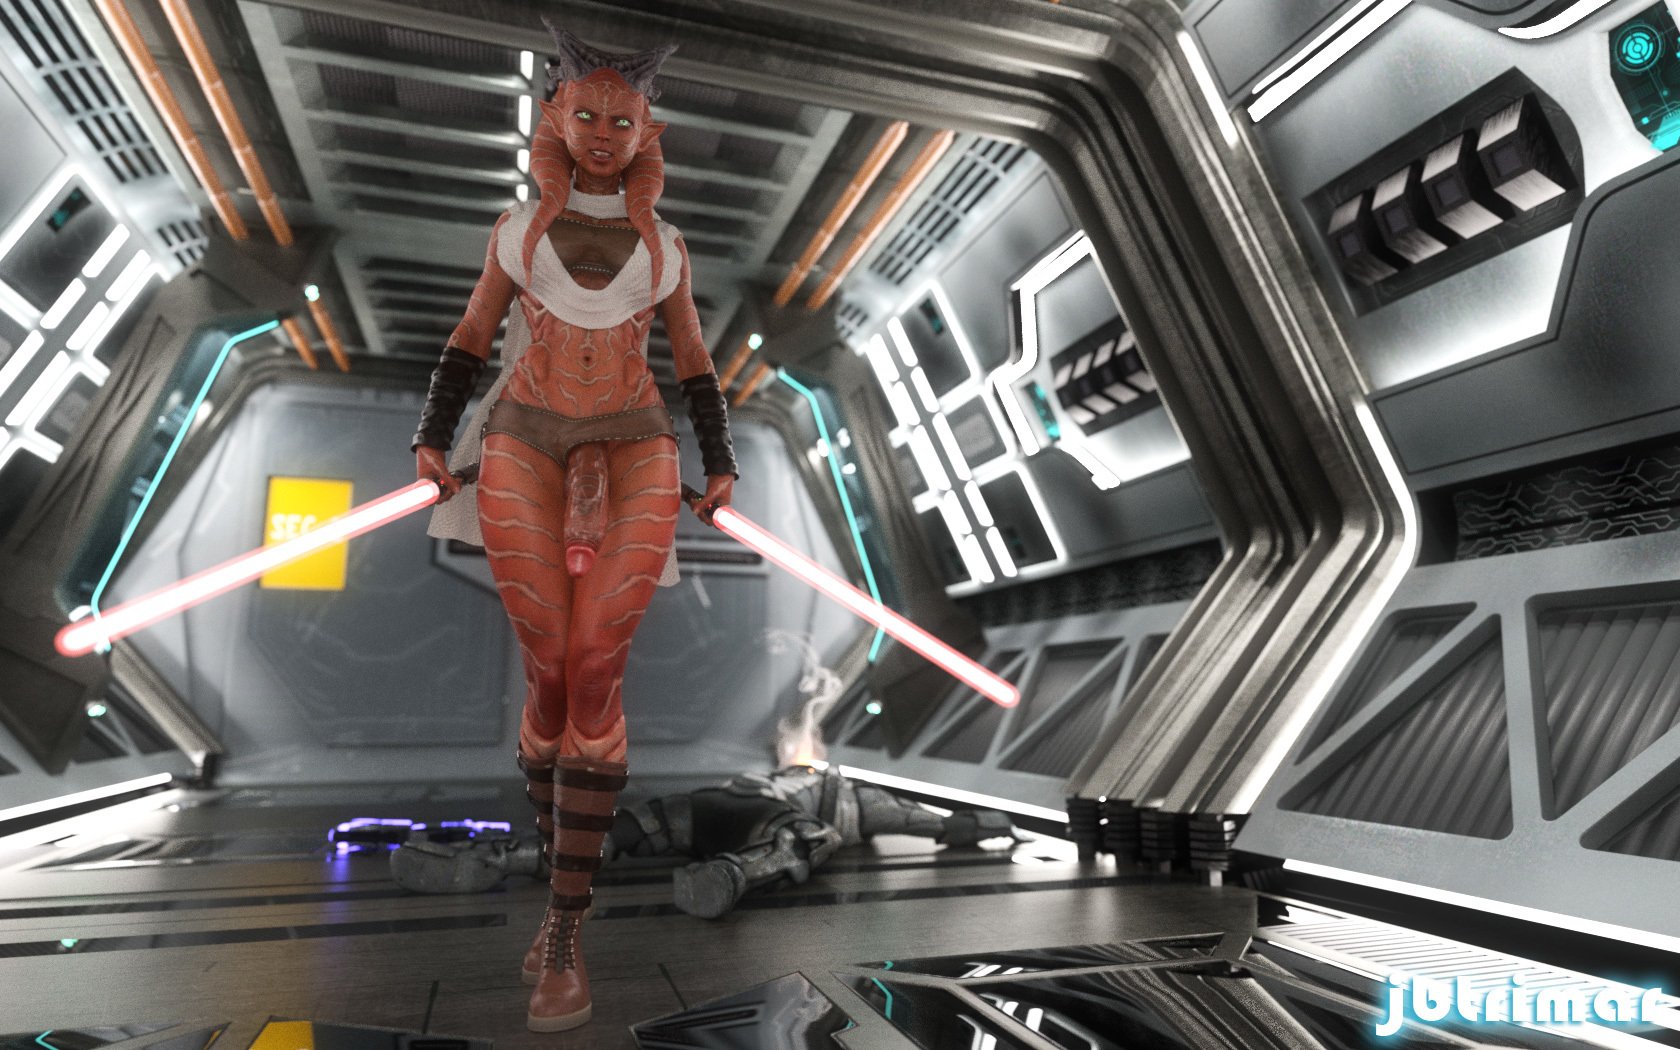 Check Out These 3DX Star Wars Creations for May the 4th!